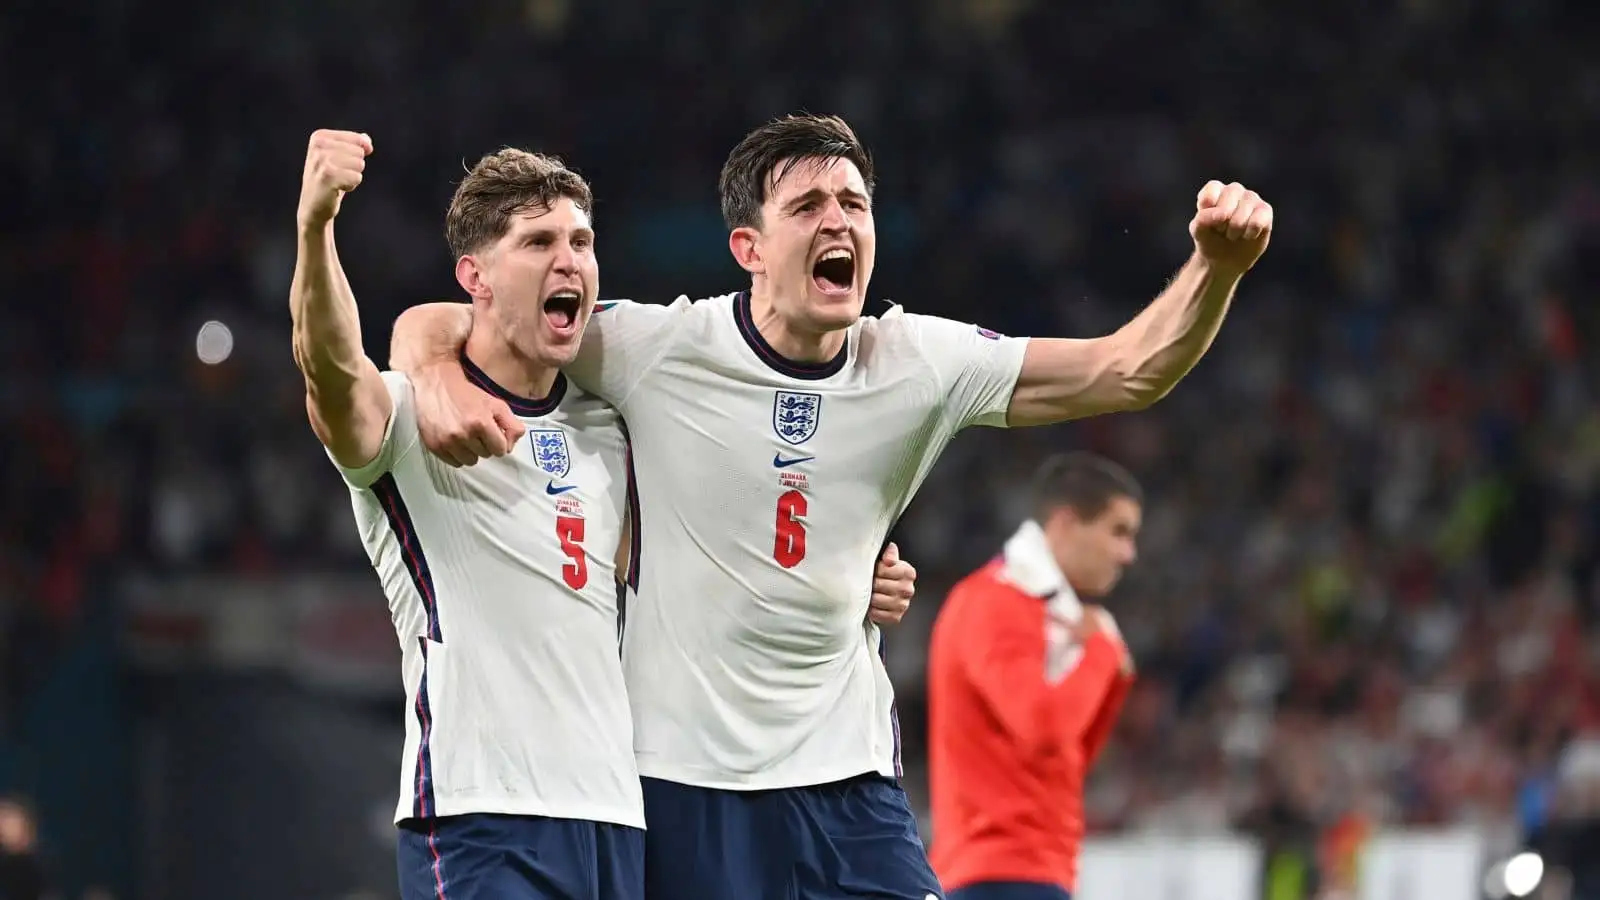 John Stones hits back at ‘harsh’ Harry Maguire criticism, lauding ‘incredible’ Man Utd star